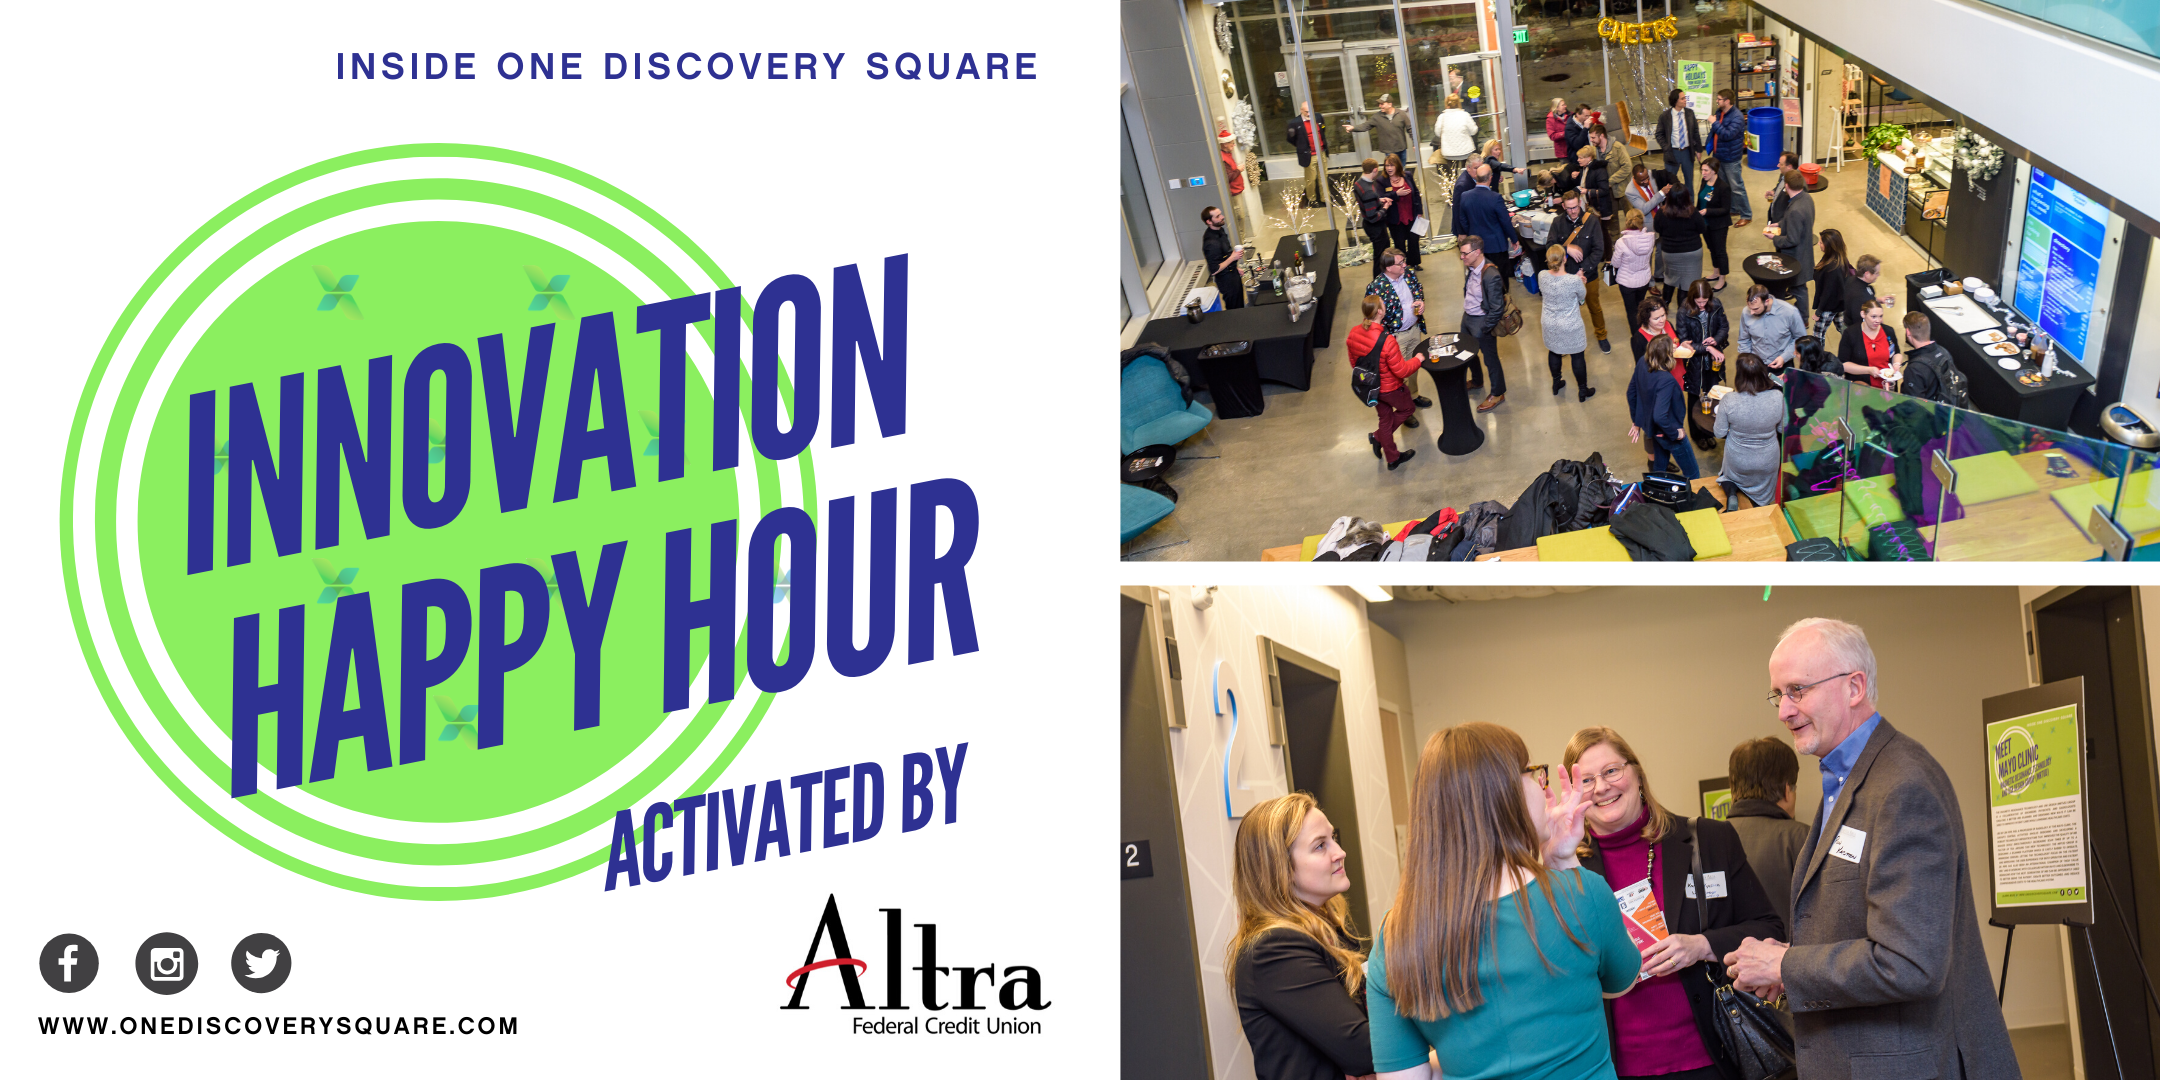 Innovation Happy Hour activated by Altra Federal Credit Union